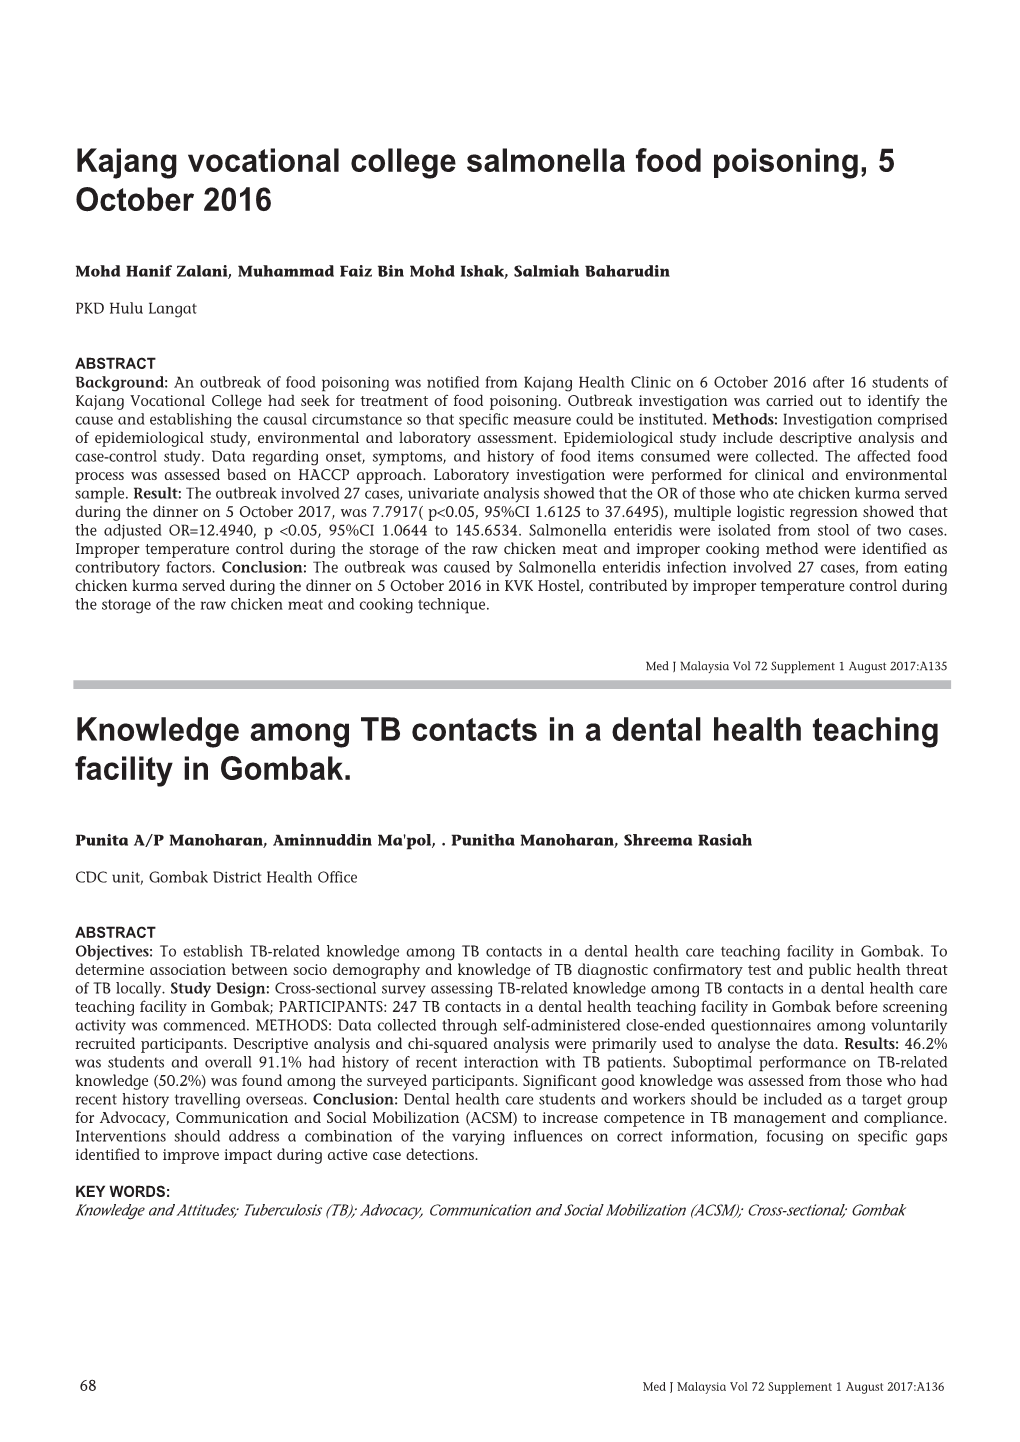 Kajang Vocational College Salmonella Food Poisoning, 5 October 2016 Knowledge Among TB Contacts in a Dental Health Teaching Faci